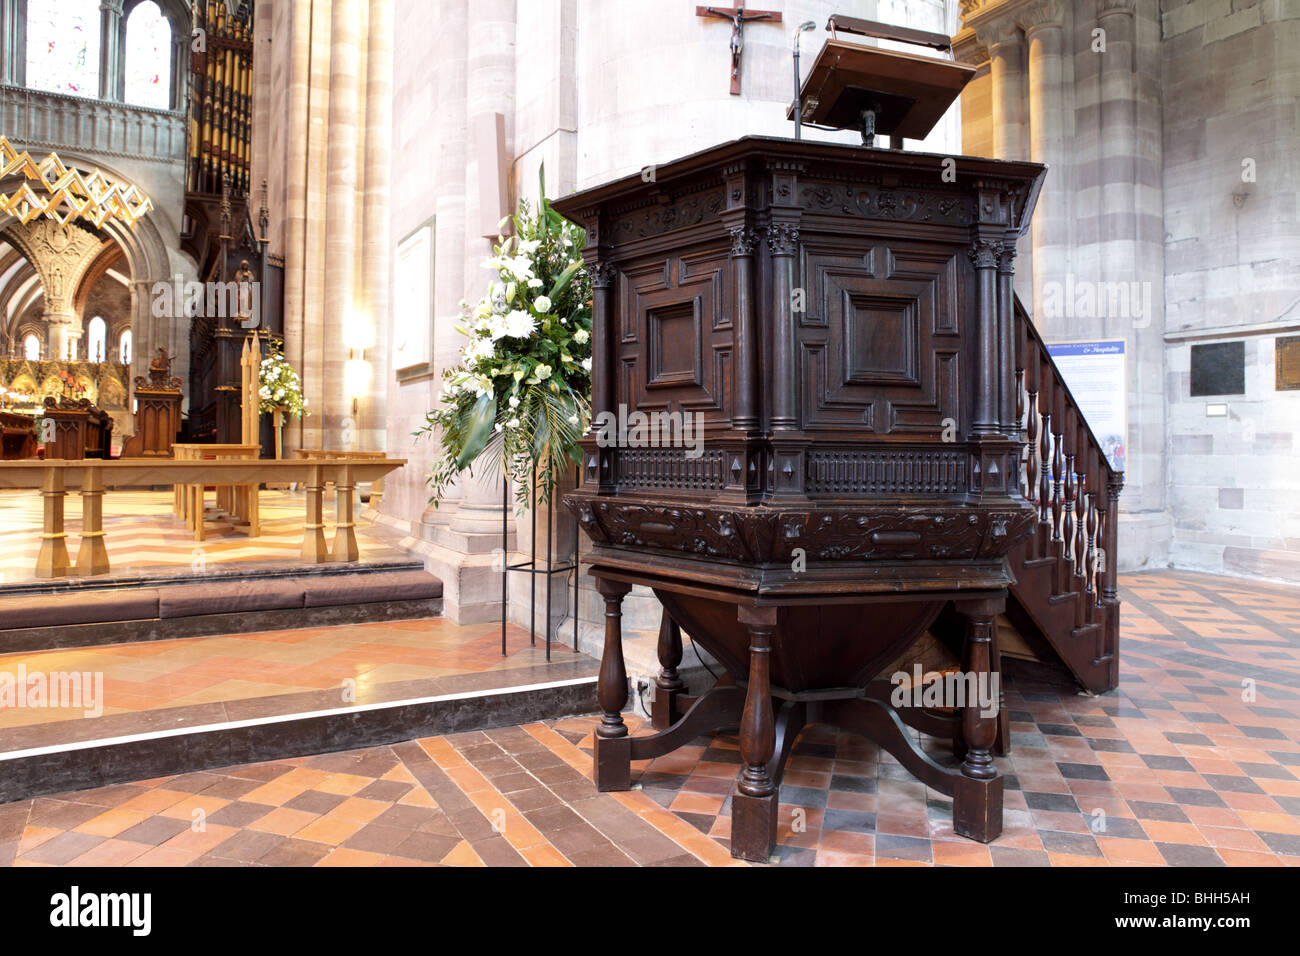 The pulpit in Hereford Cathedral,fine carving and balustrades adorn this fine piece of furniture. Stock Photo